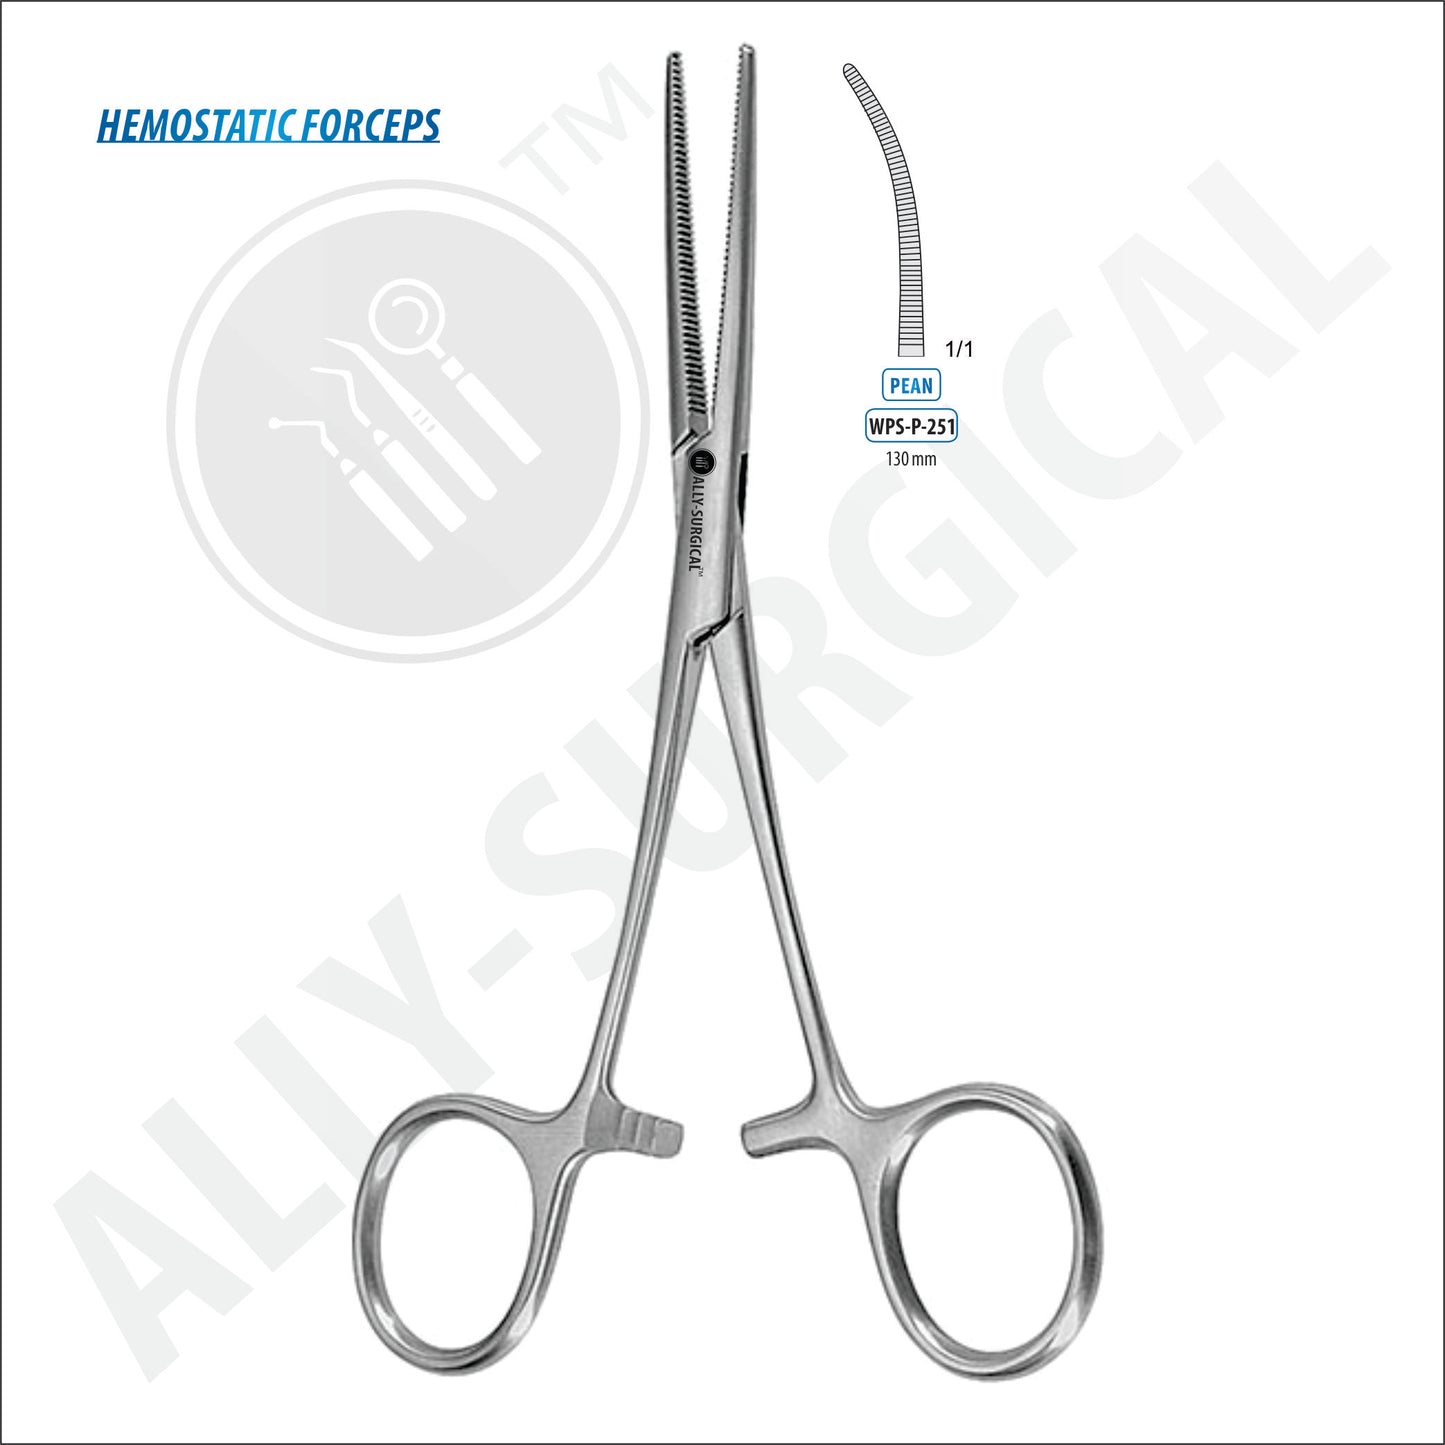 Rochester-PEAN Hemostatic Forceps, Curved 130 mm